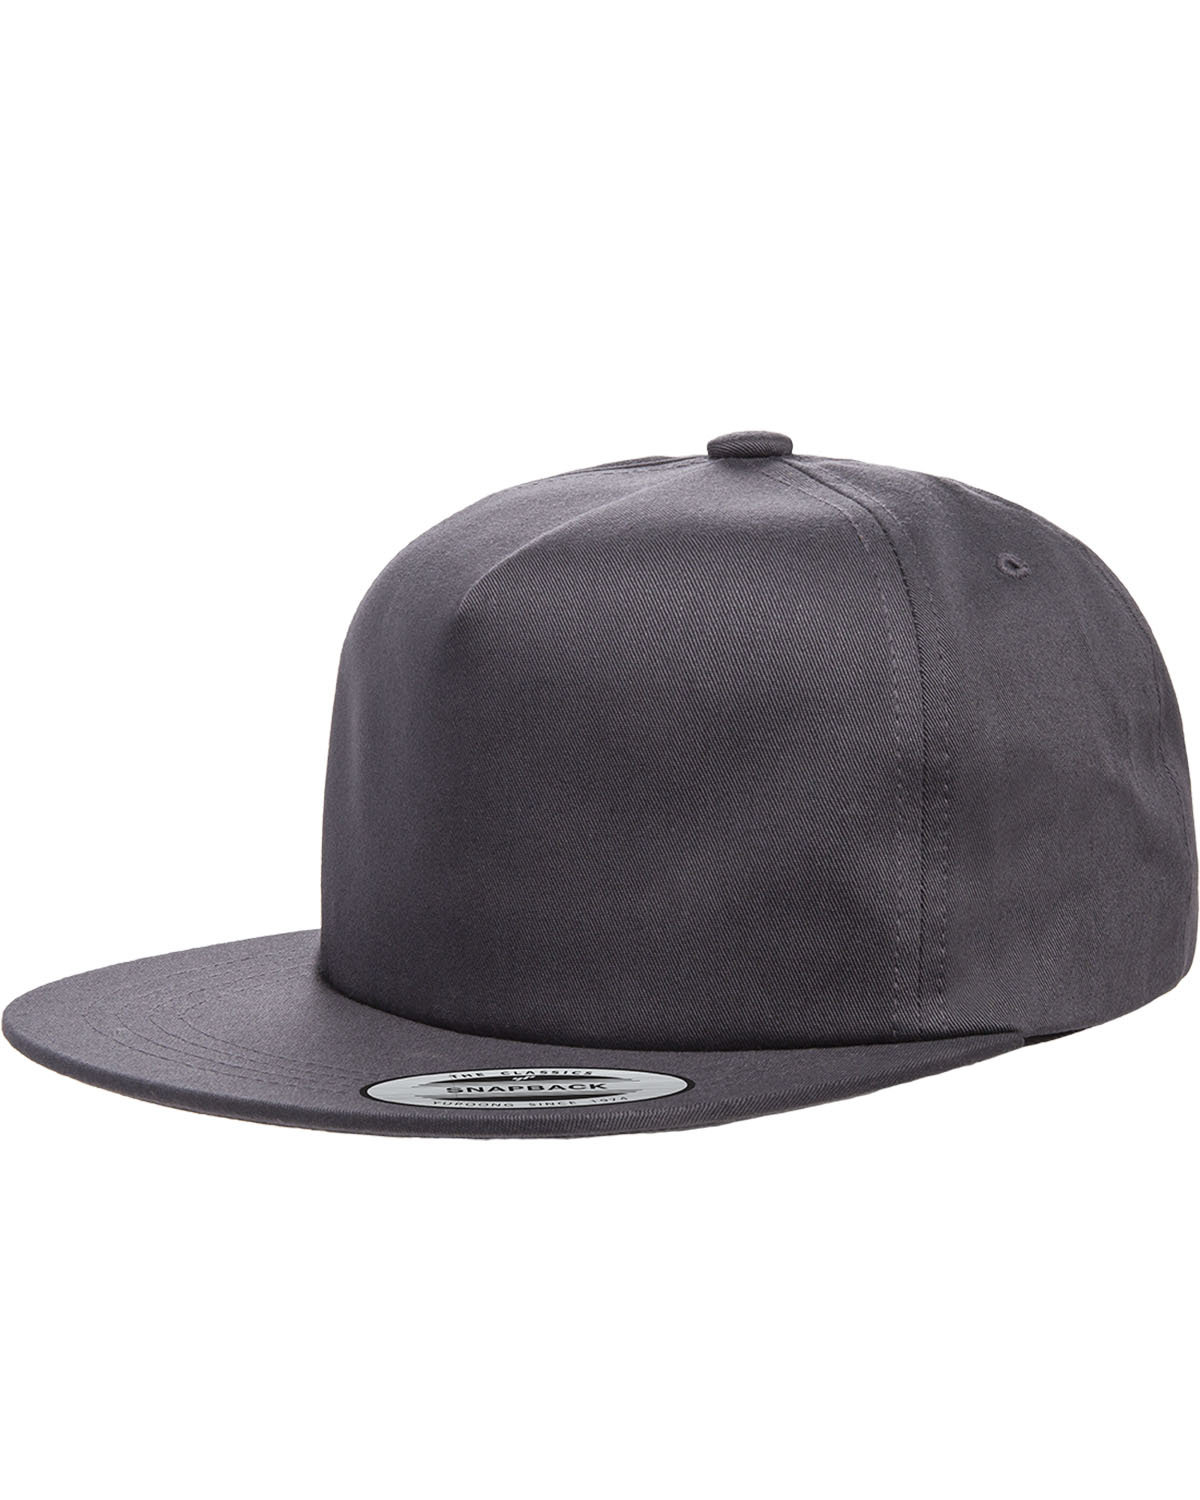 Yupoong Adult Unstructured 5-Panel Snapback Cap | alphabroder